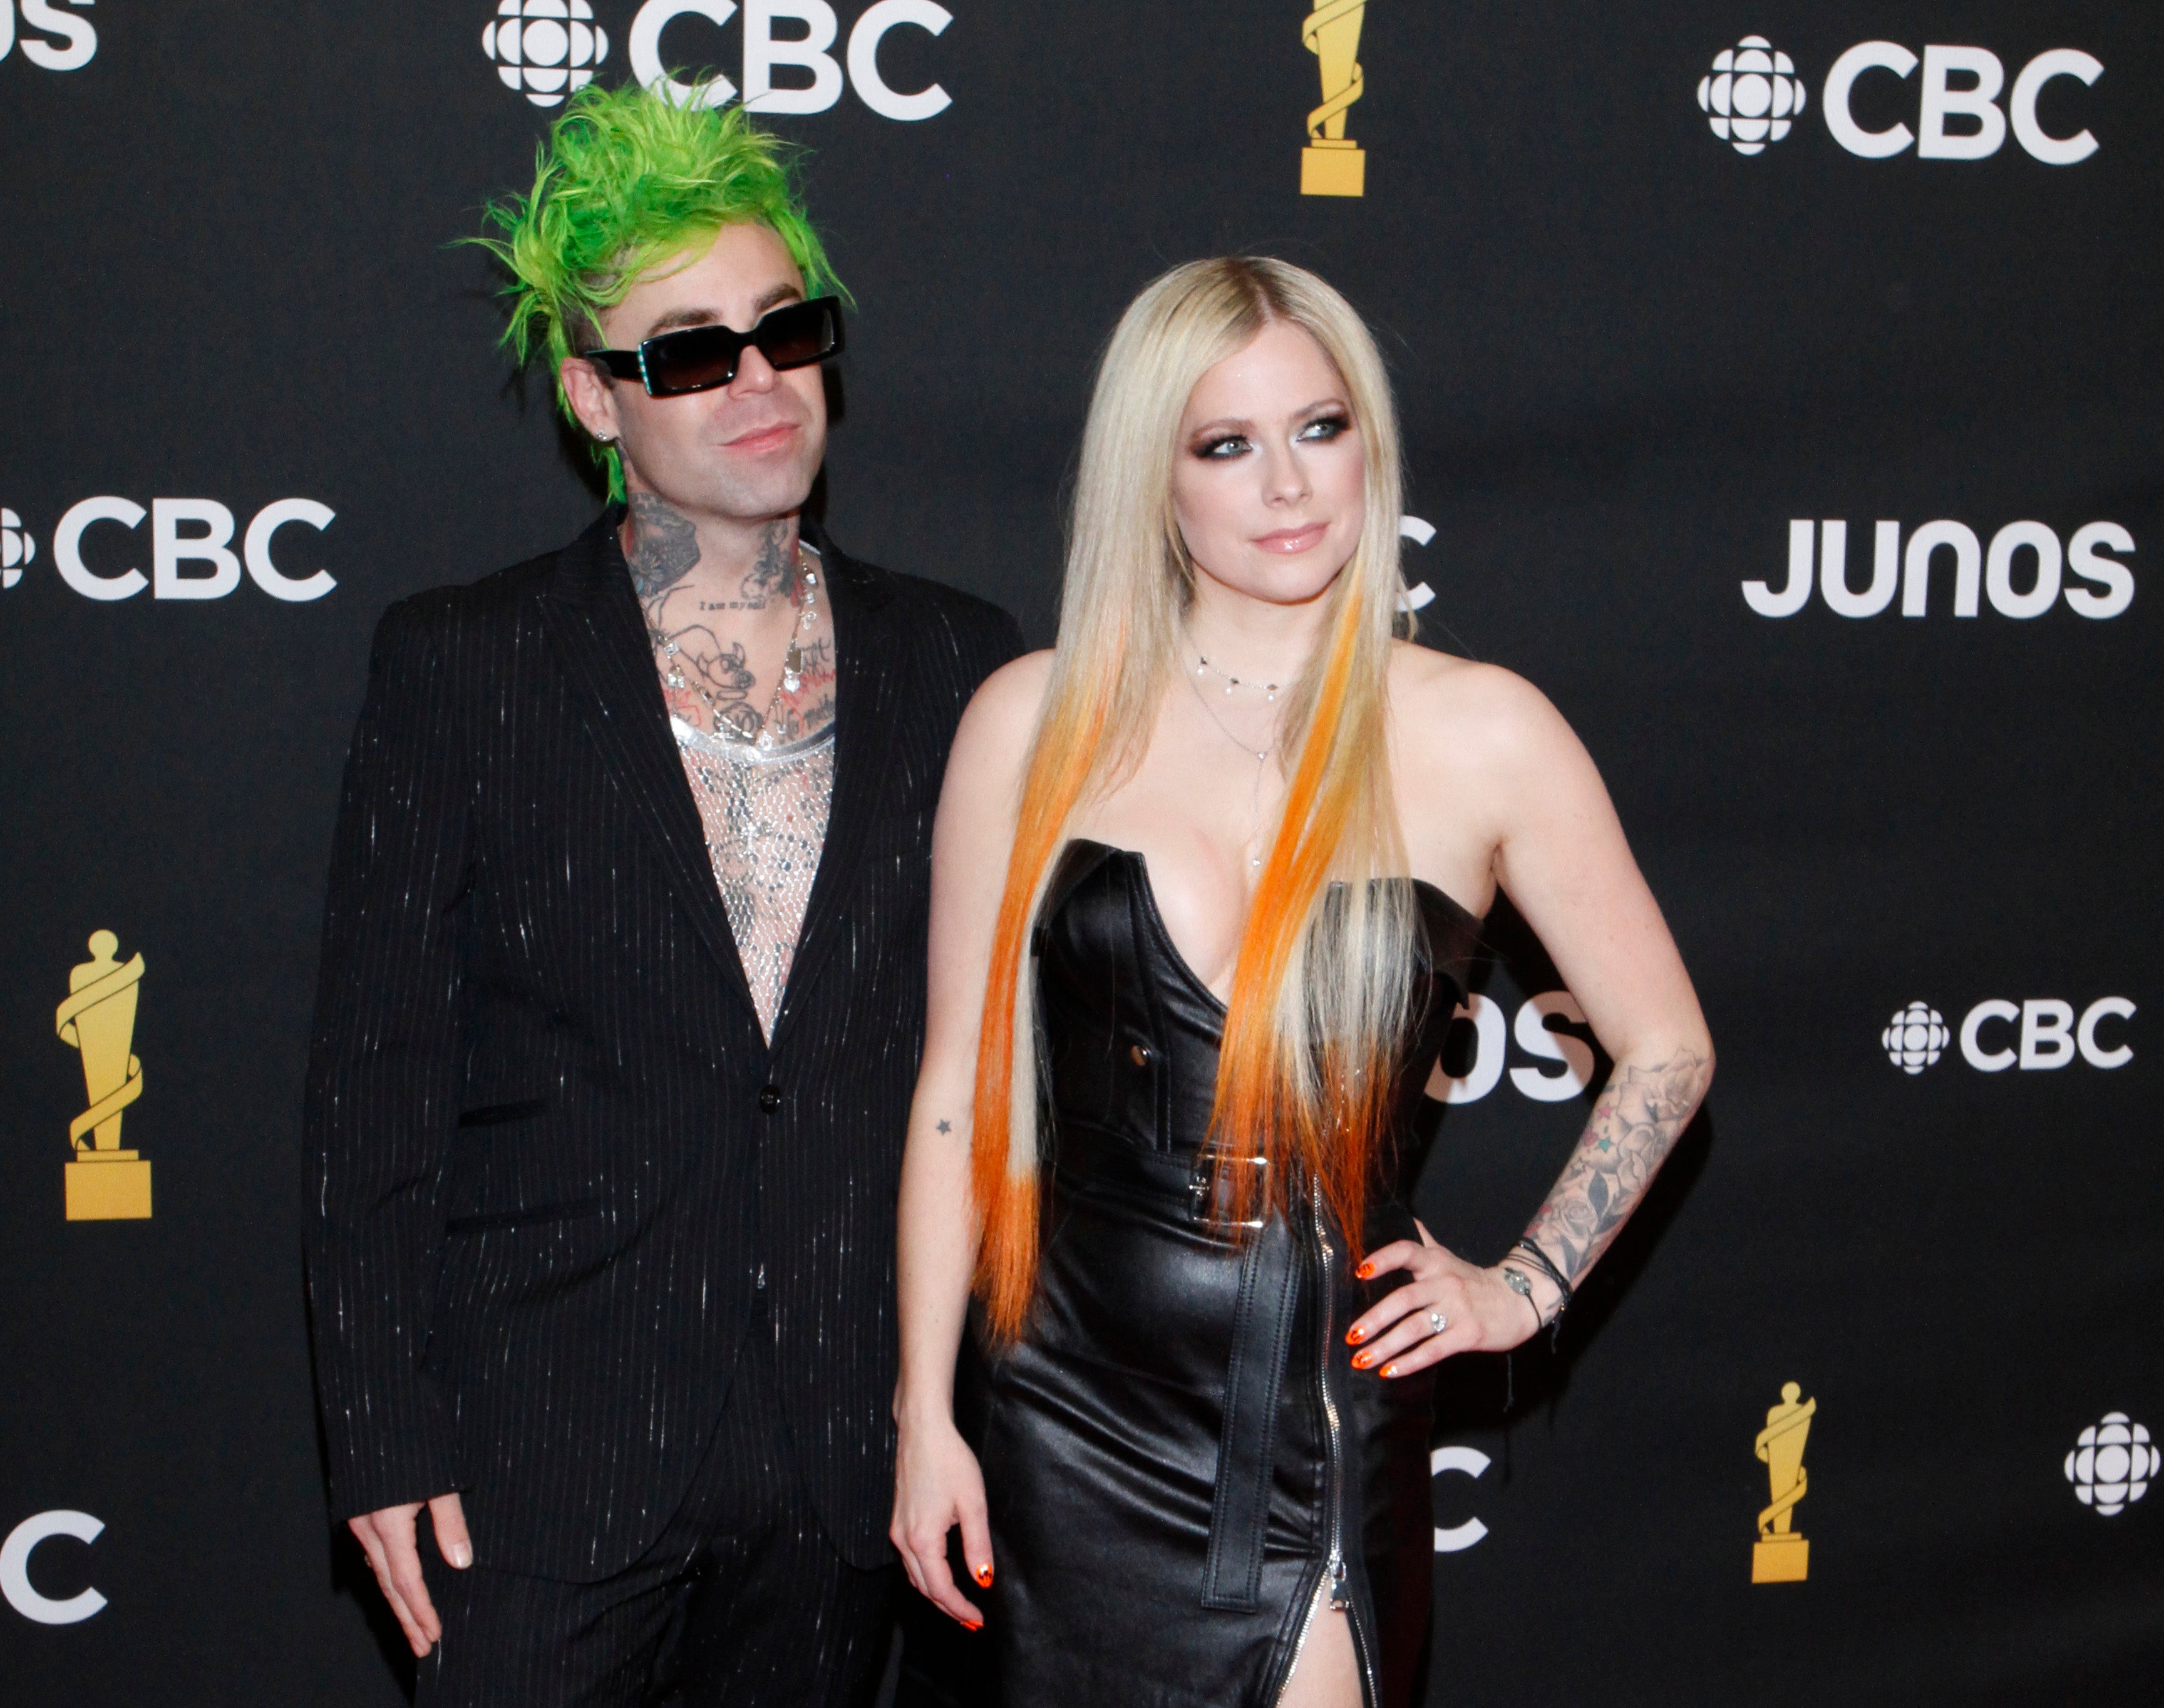 Reports suggest that Lavigne and Mod Sun have broken up and reunited several times